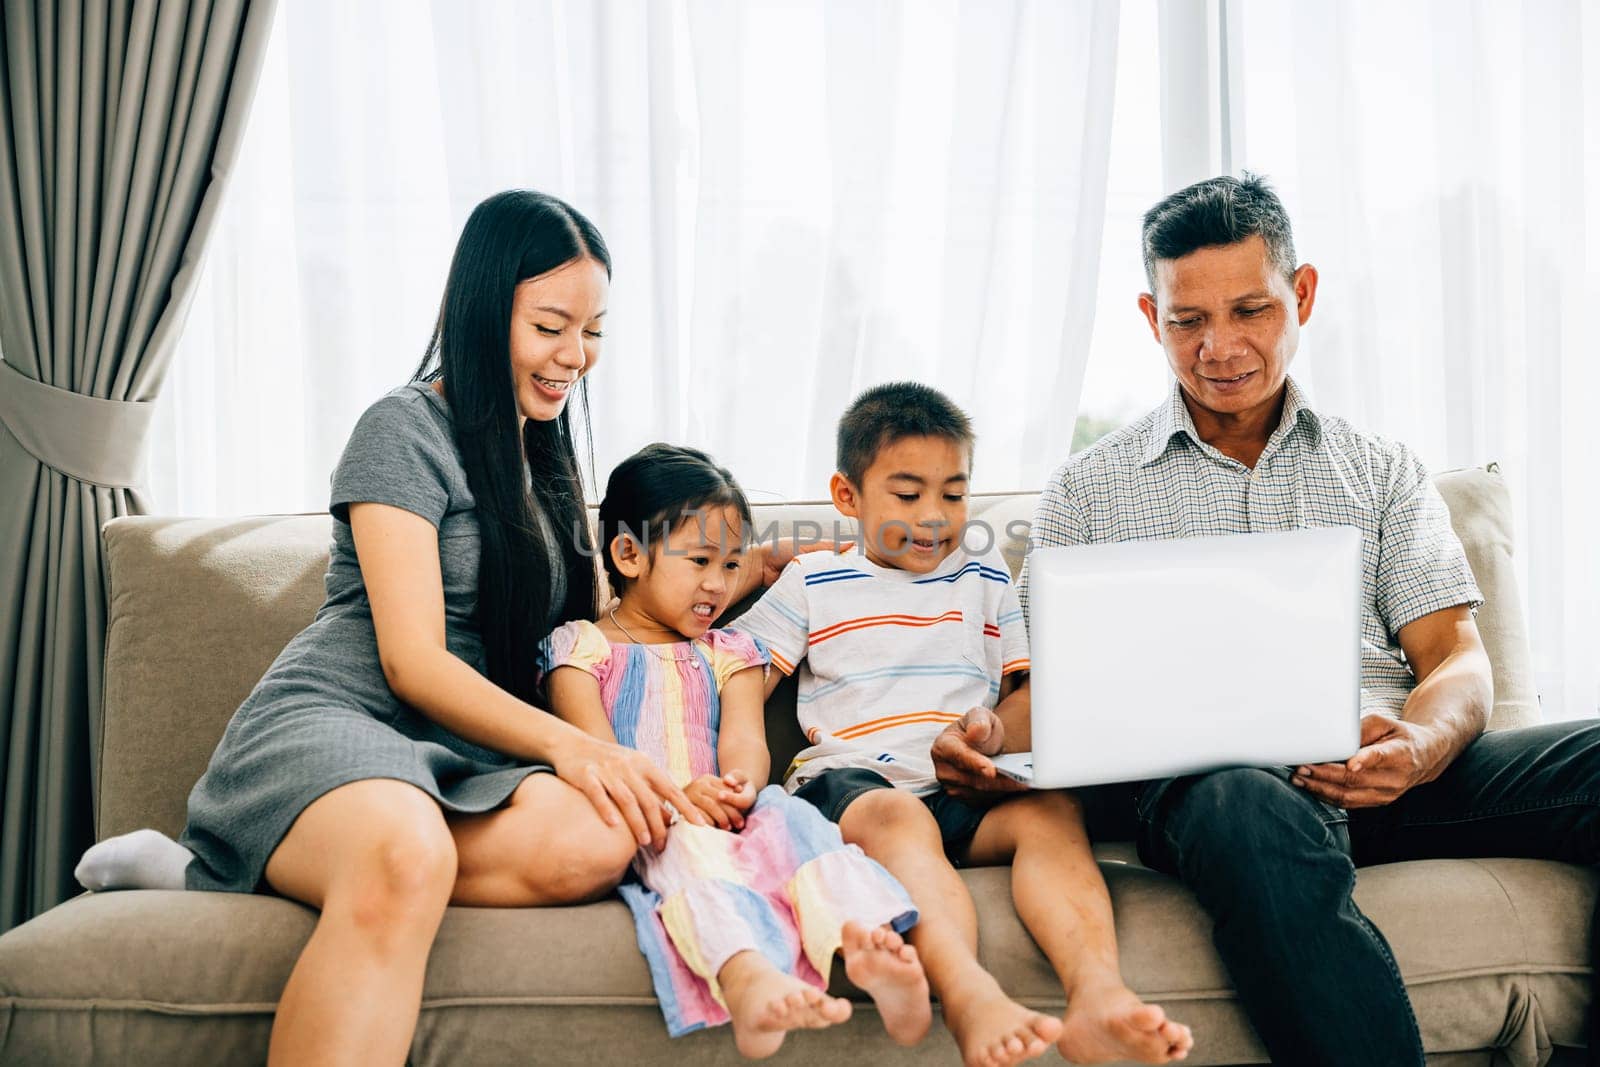 A cheerful family seated on a cozy sofa sharing a laptop parents and kids engaged in online browsing by Sorapop